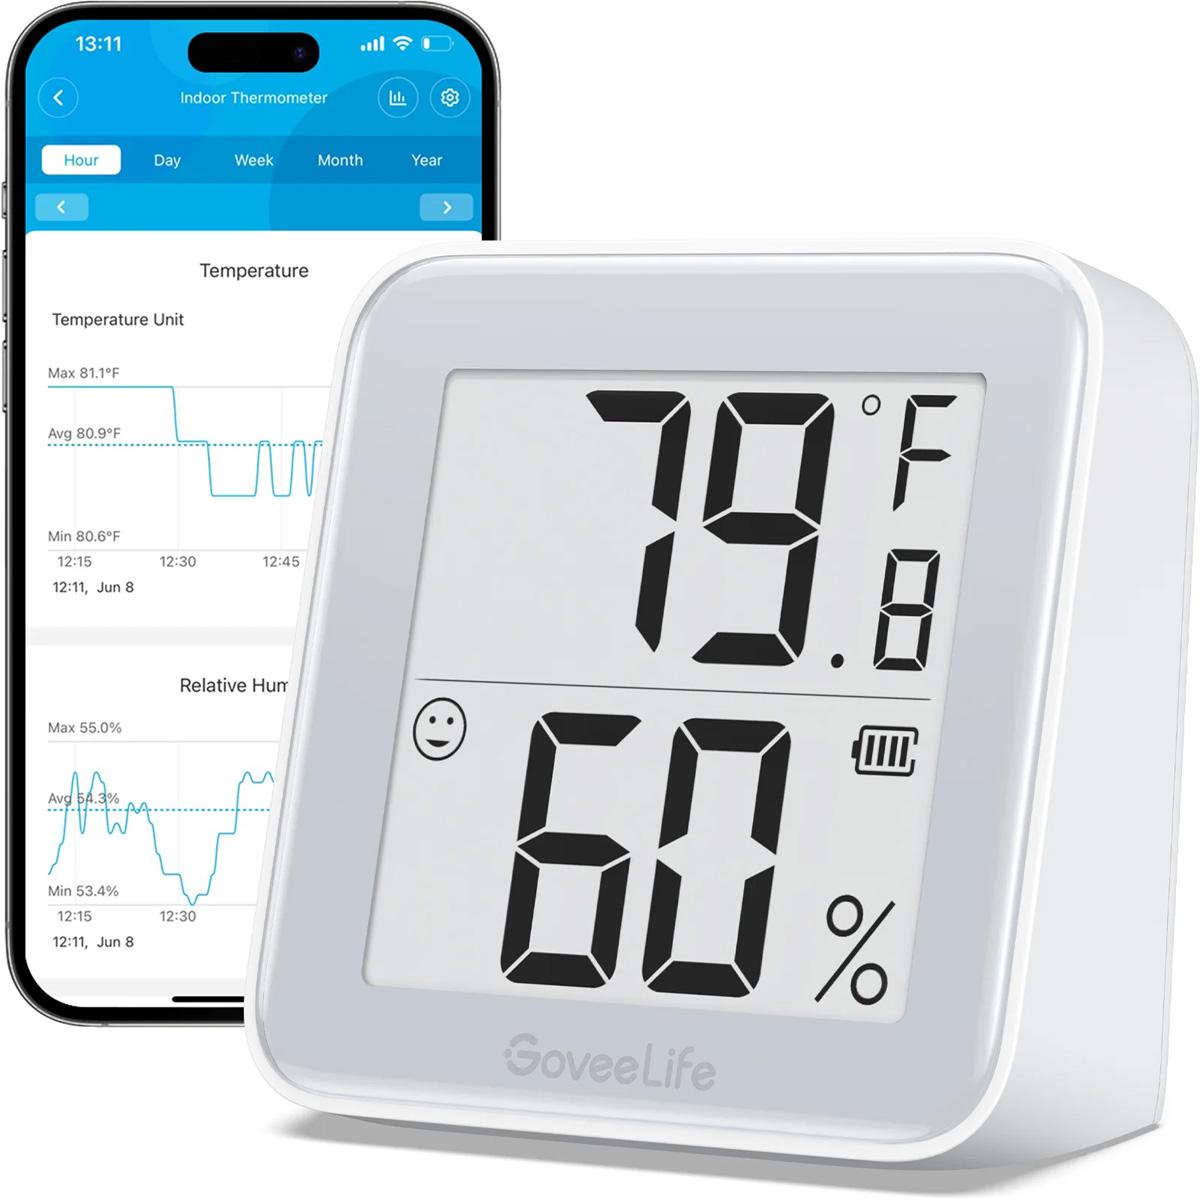 GoveeLife Smart Thermo-Hygrometer 2s for $7.99 Shipped